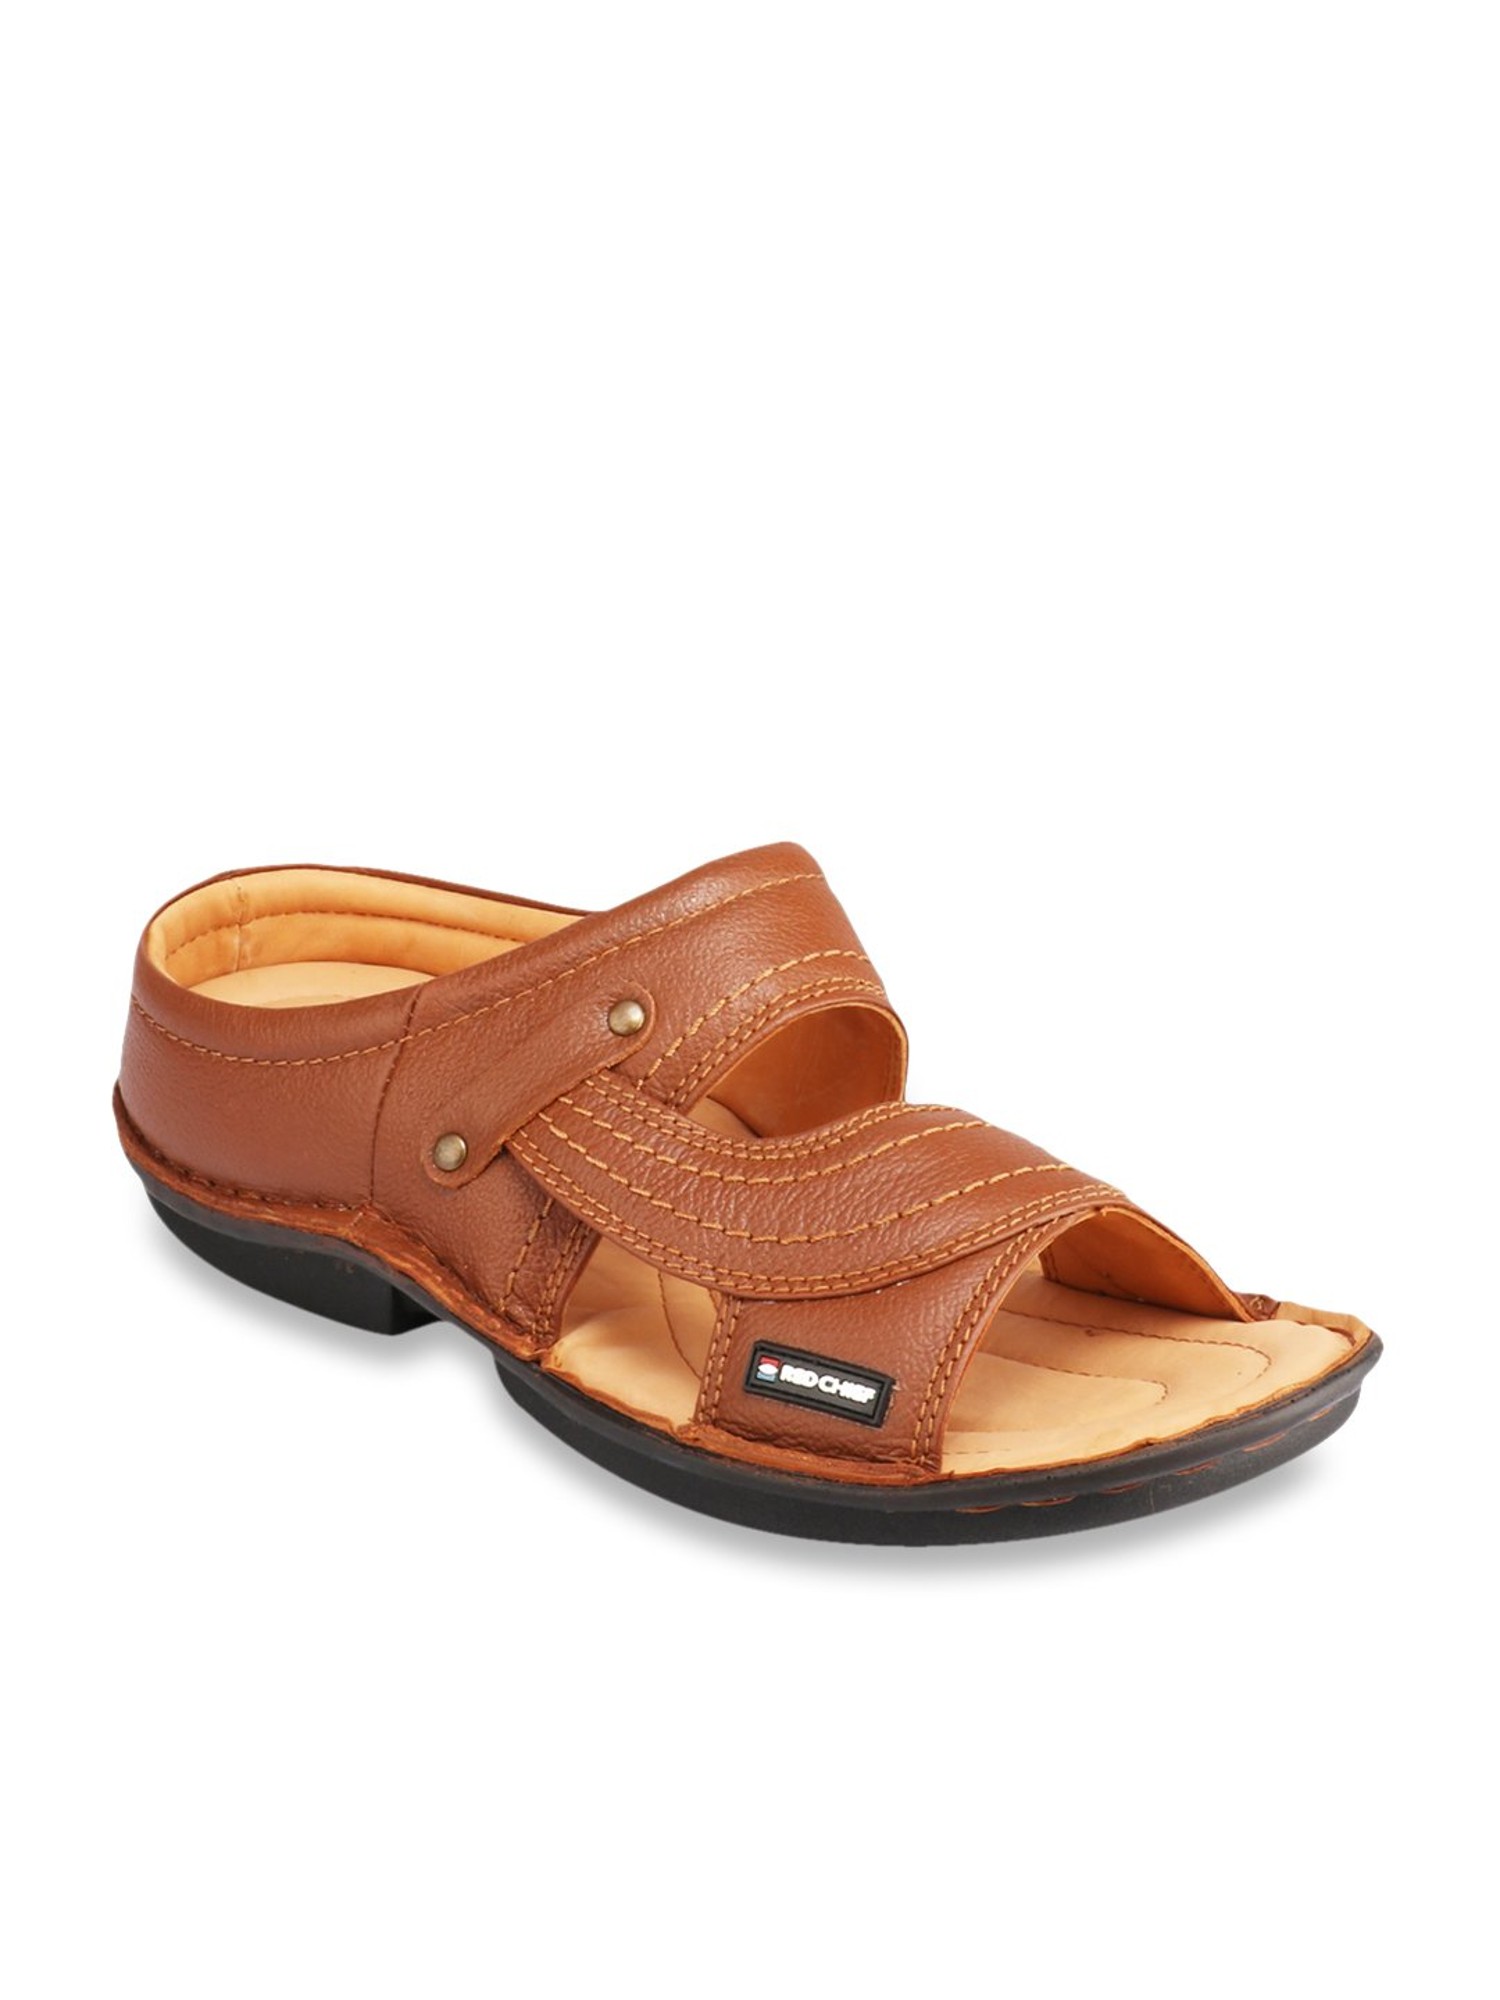 Red Chief Tan Casual Sandals from Red 